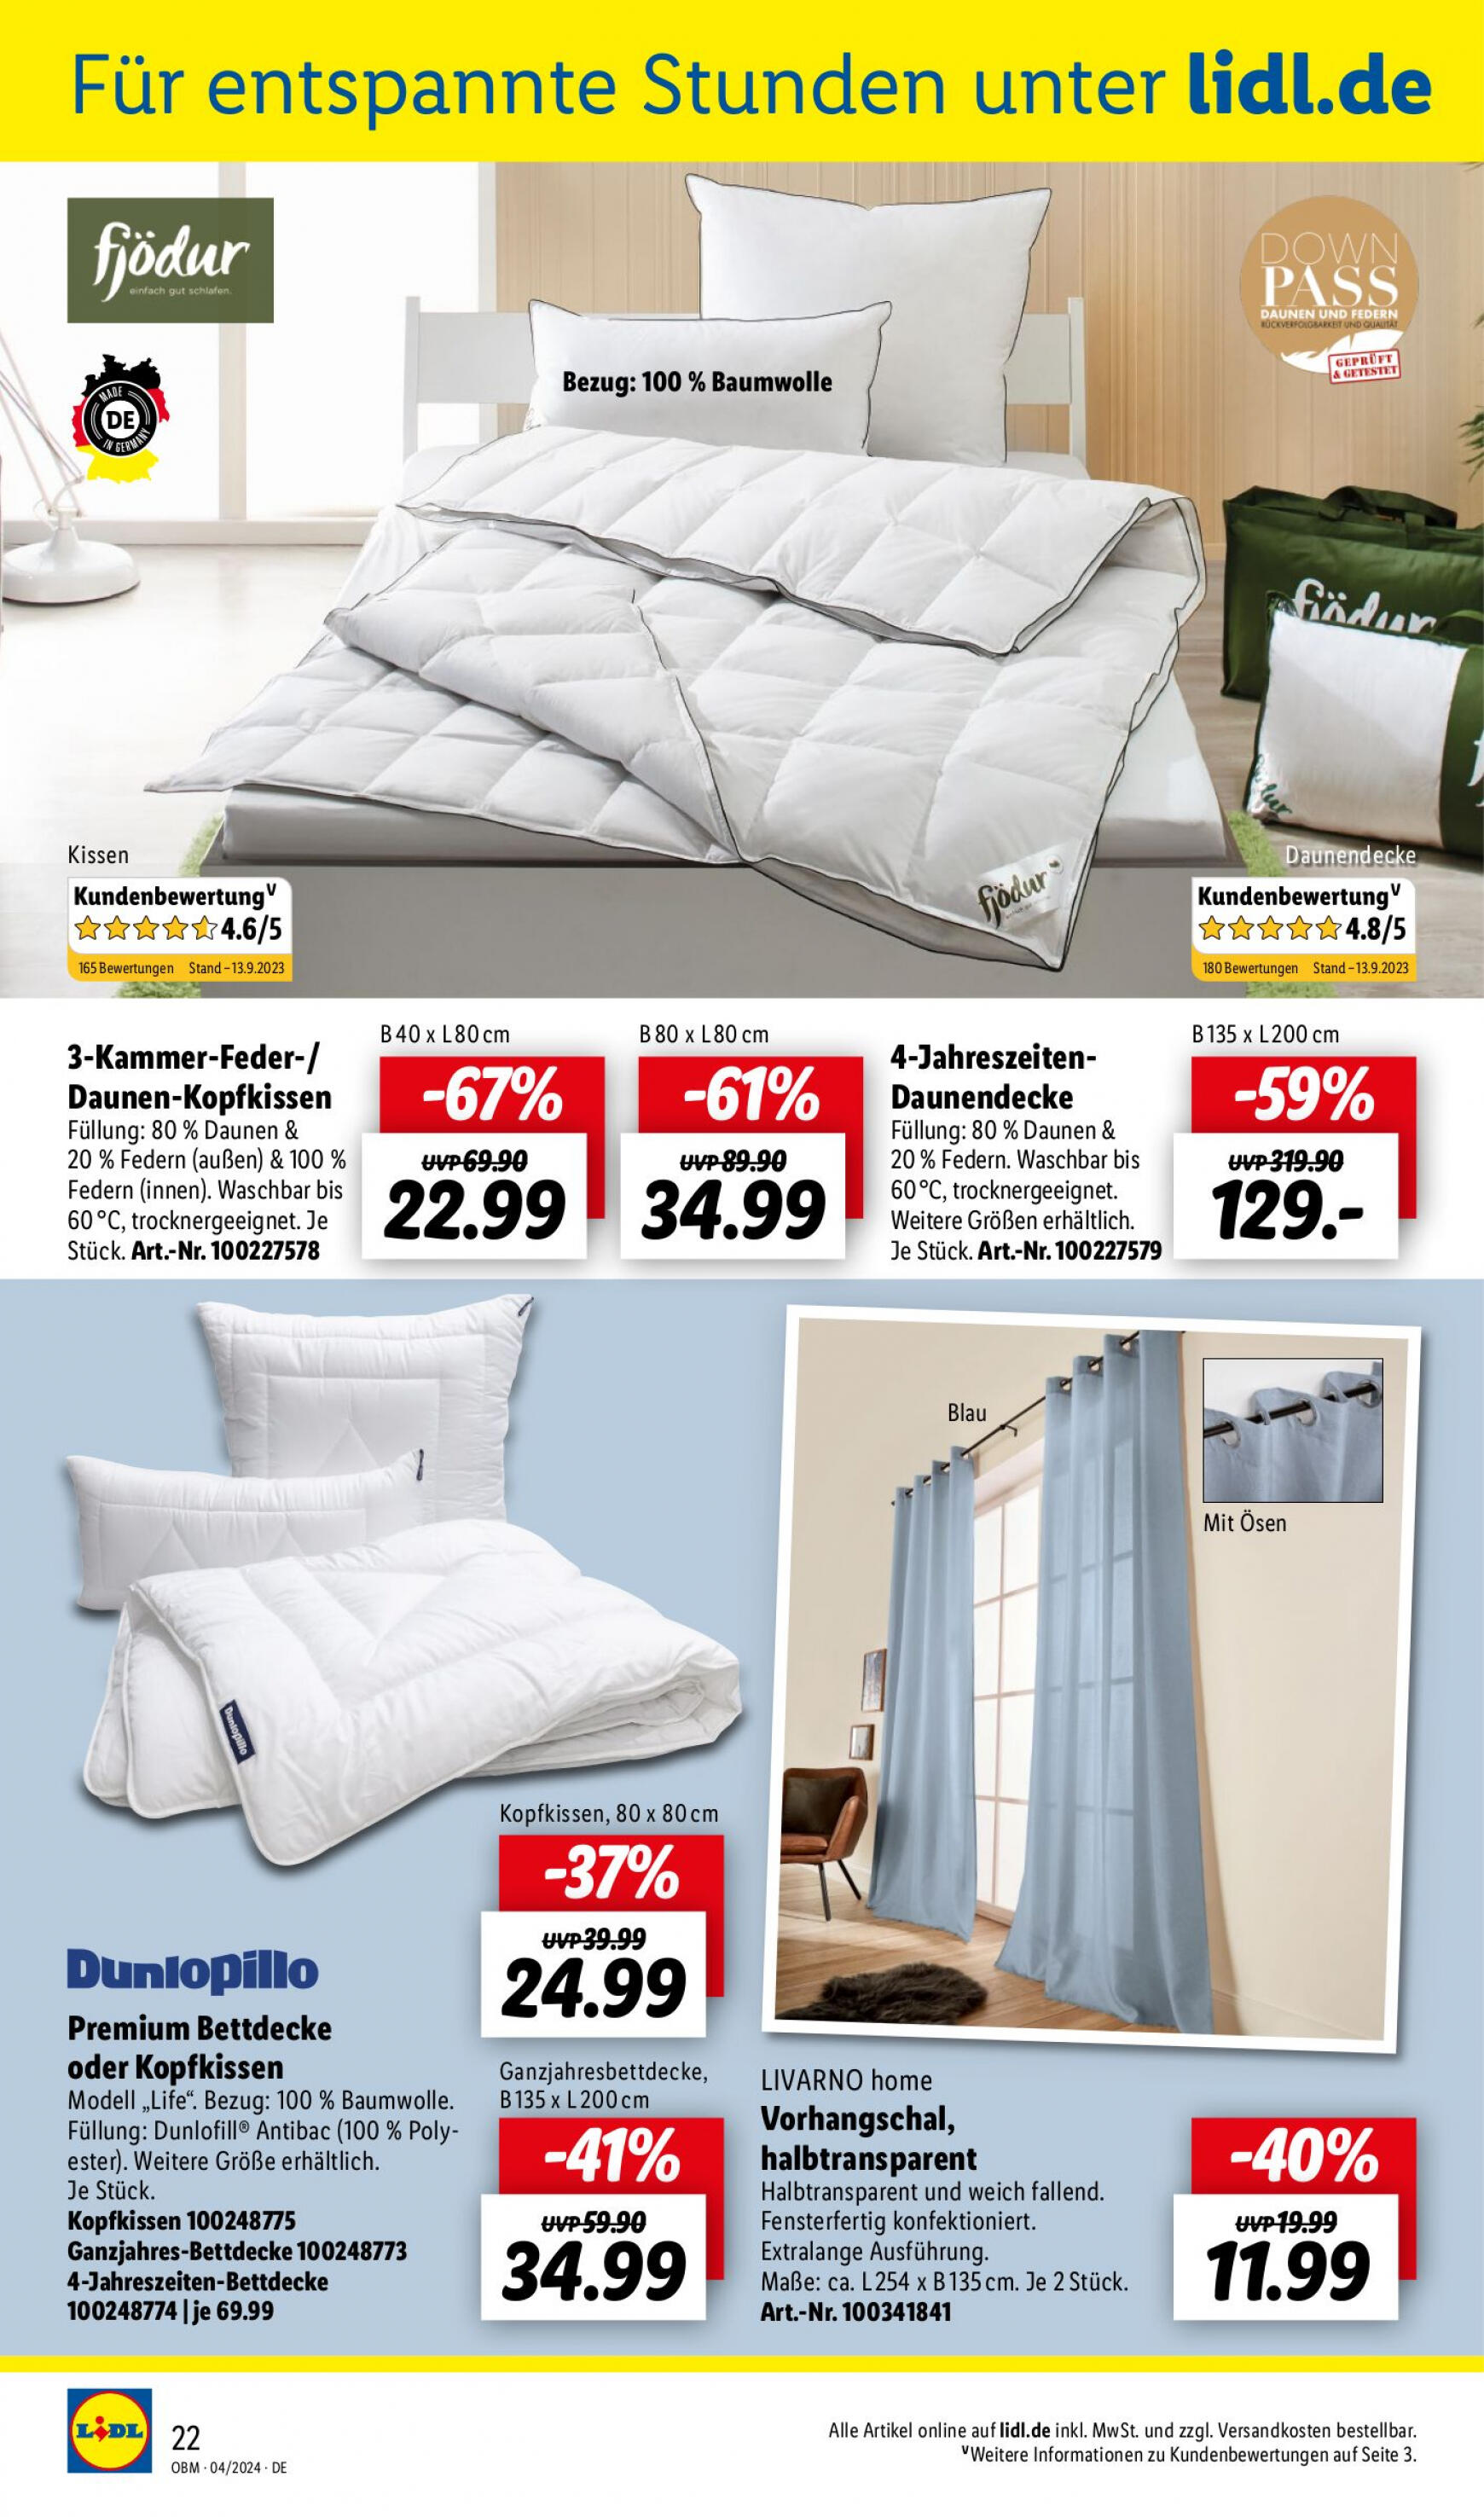 lidl - Flyer Lidl - Aktuelle Onlineshop-Highlights aktuell 01.04. - 30.04. - page: 22